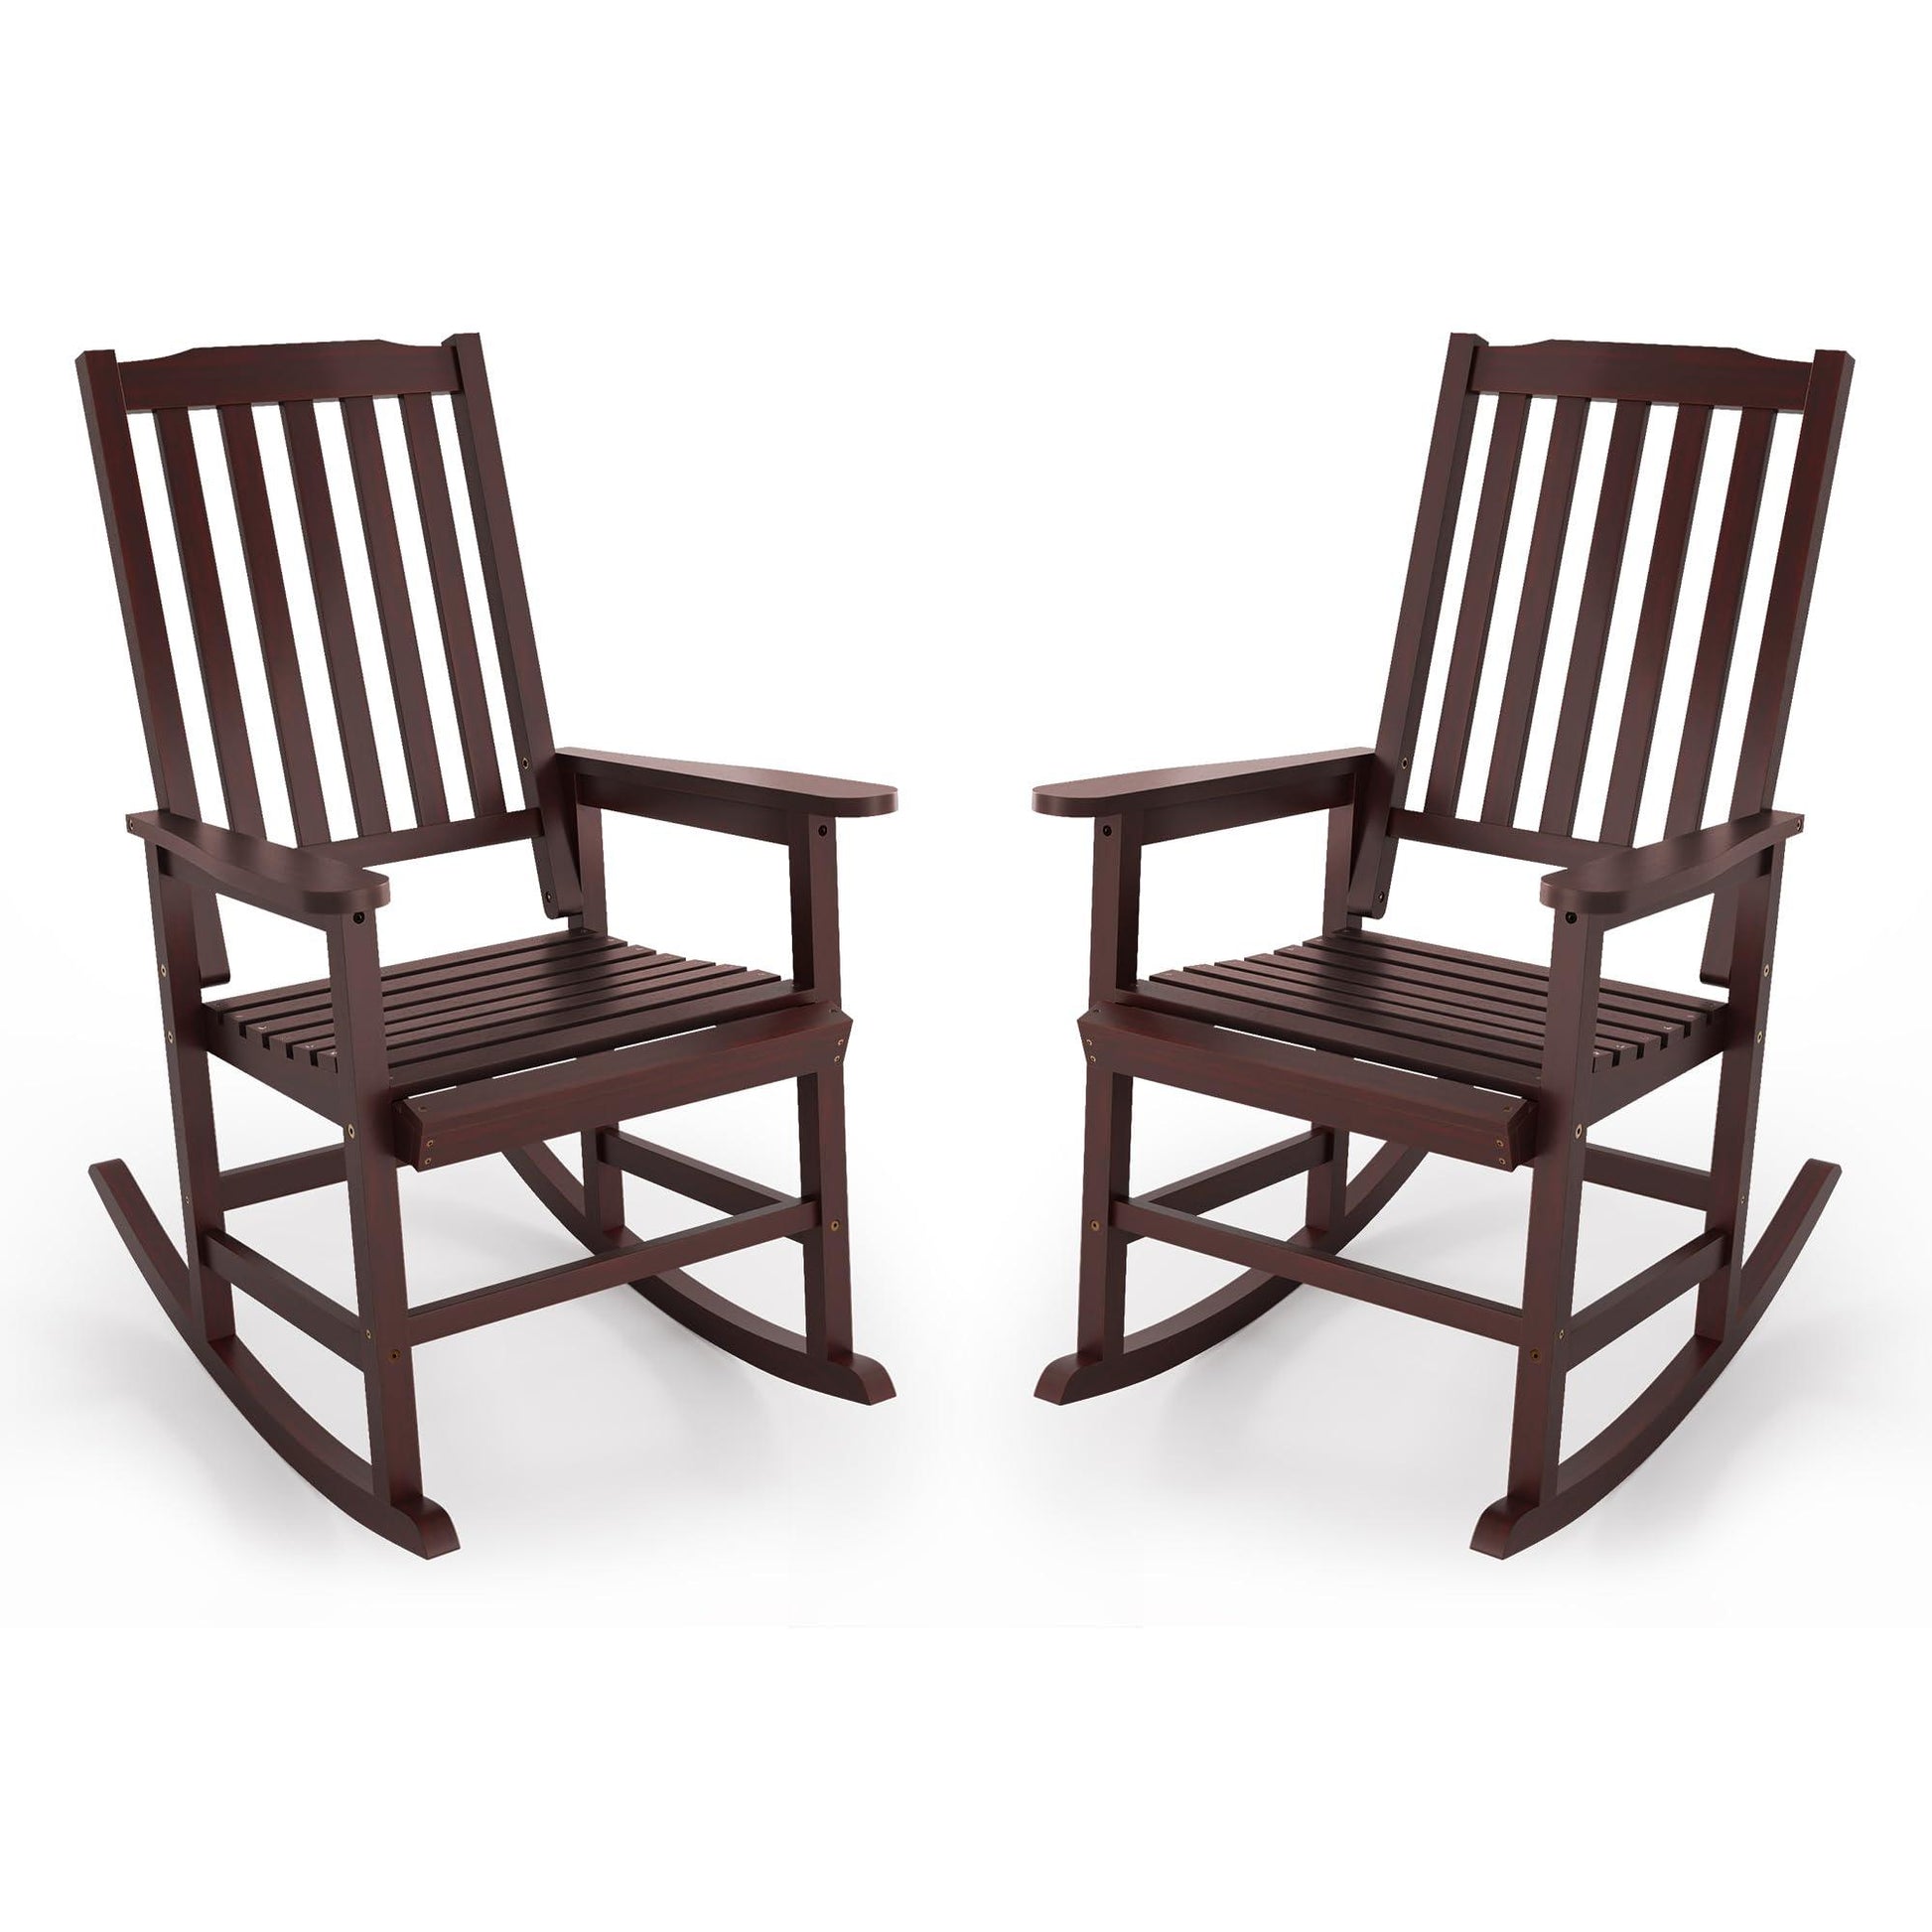 Cozyman Outdoor Rocking Chairs Set of 2, Oversized Wooden Rocking Chairs with Wide Seats, All Weather Resistant Rocker Chair, Porch Patio Chair for Backyard Lawn Garden, 350 Lbs Heavy Duty, Espresso - CookCave